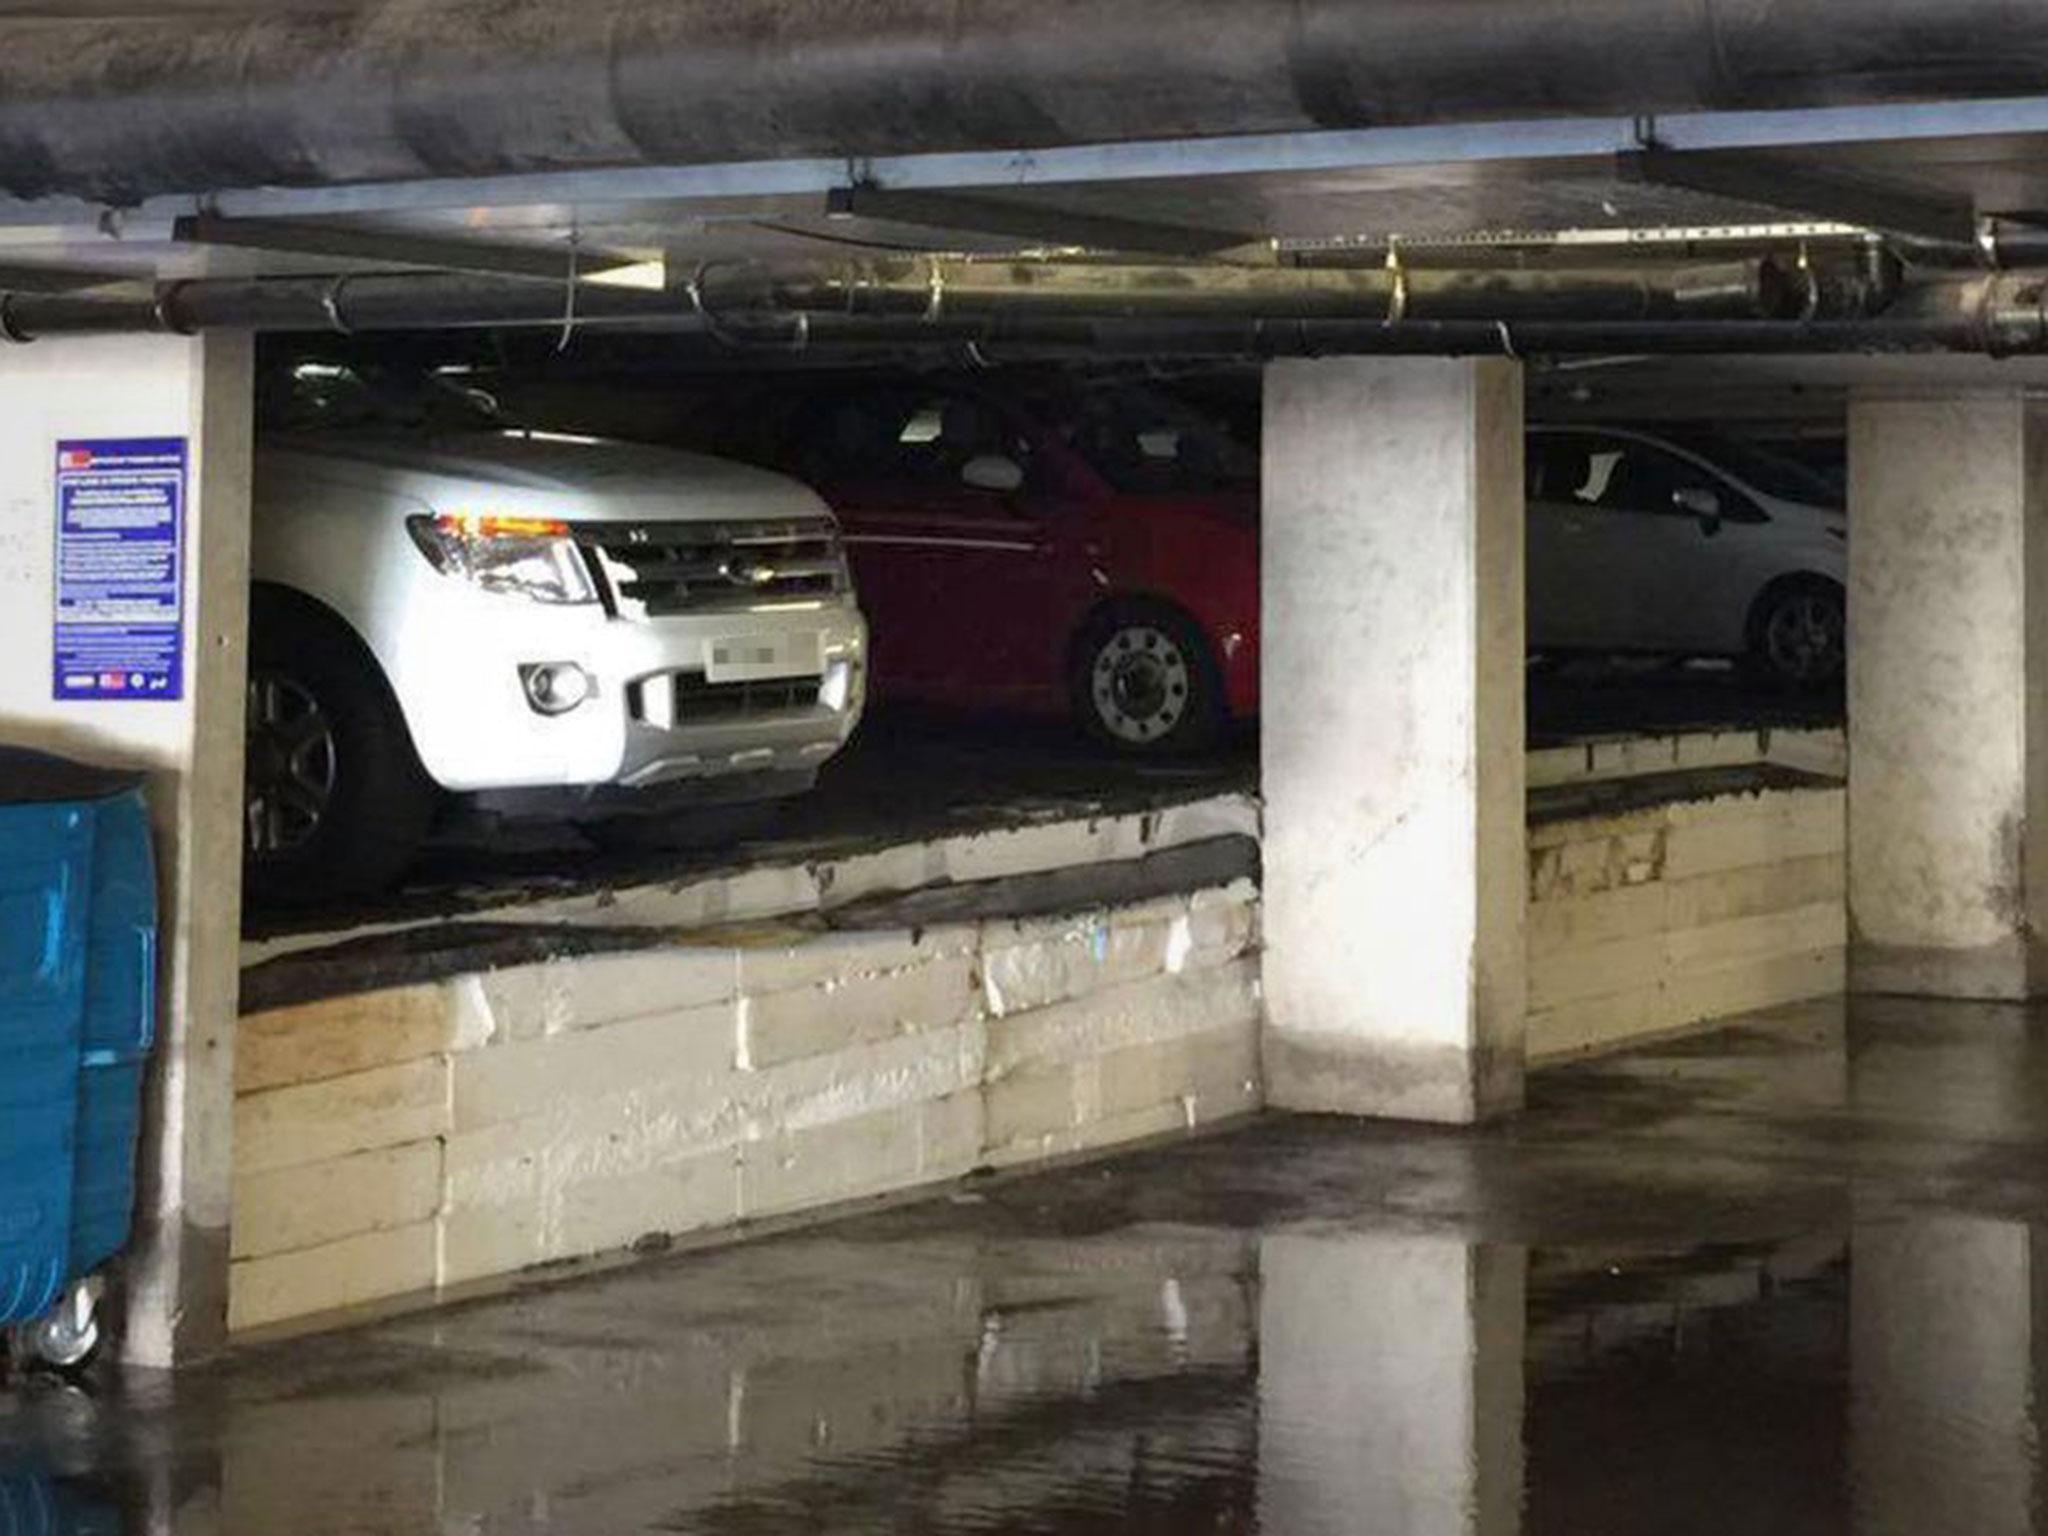 Vehicles damaged in the flooding after insulation became swollen after taking on water